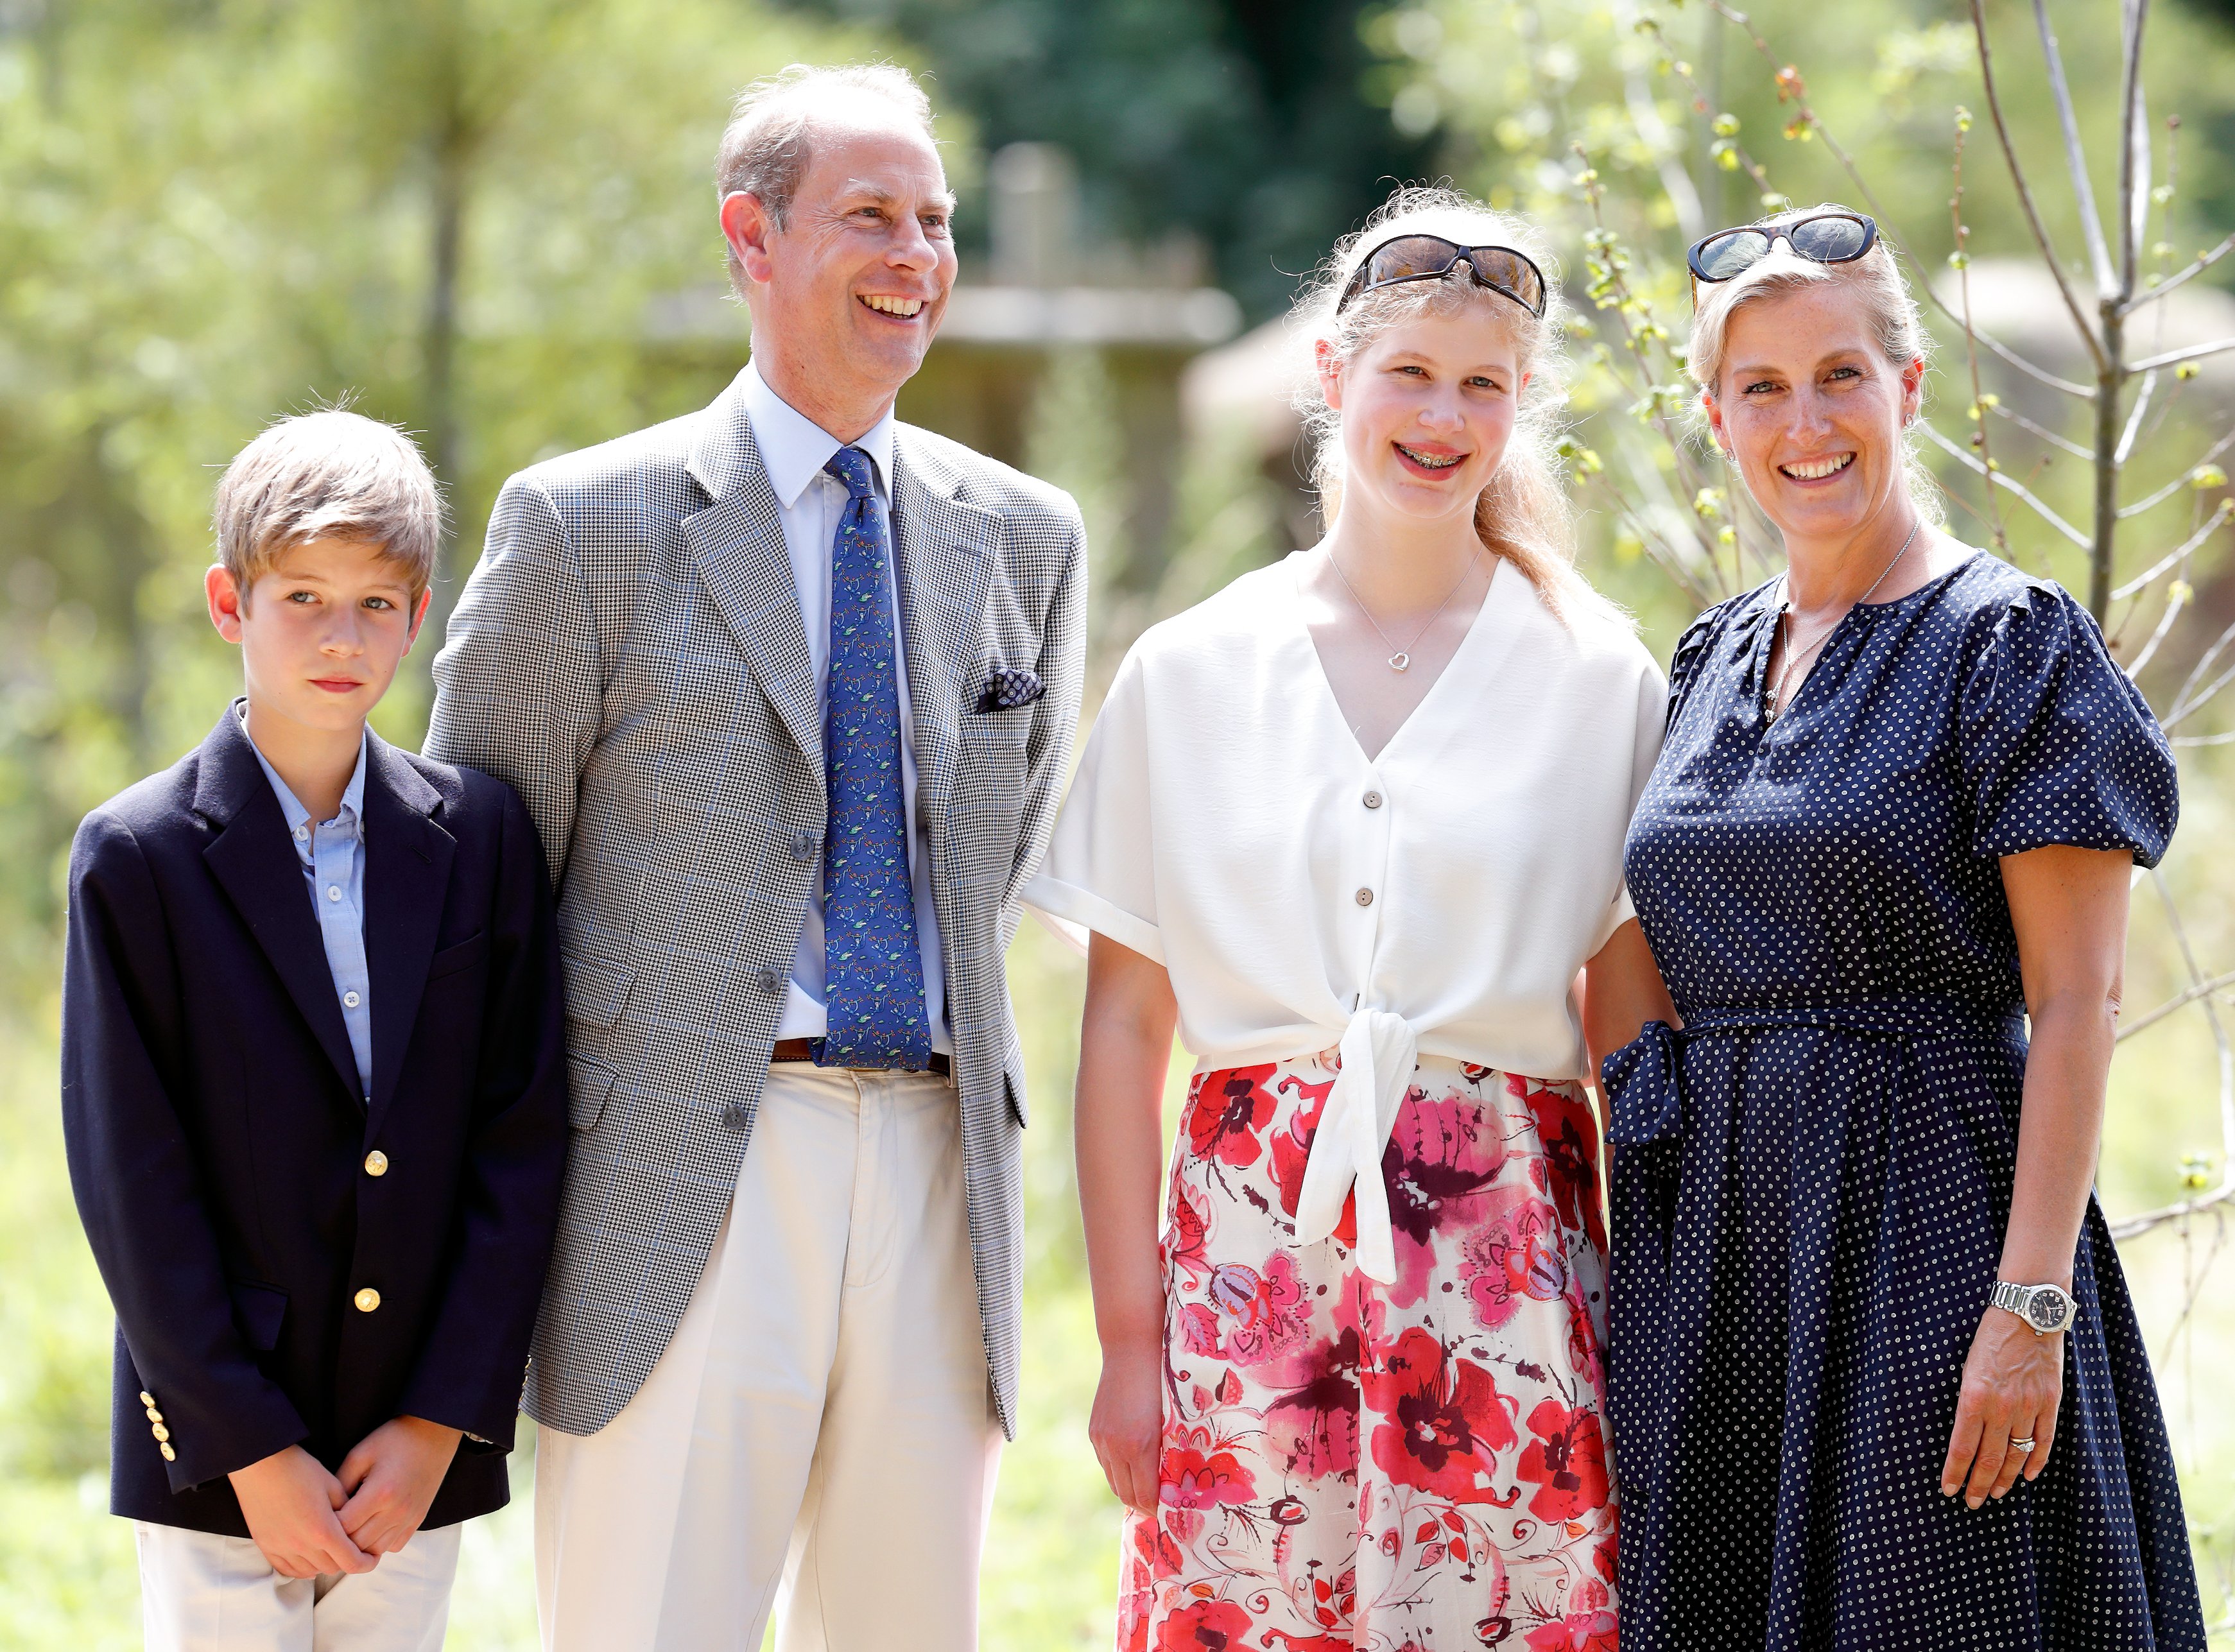 James, Viscount Severn, Prince Edward, Earl of Wessex, Lady Louise Windsor and Sophie, Countess of Wessex visit The Wild Place Project at Bristol Zoo on July 23, 2019 in Bristol, England | Source: Getty Images